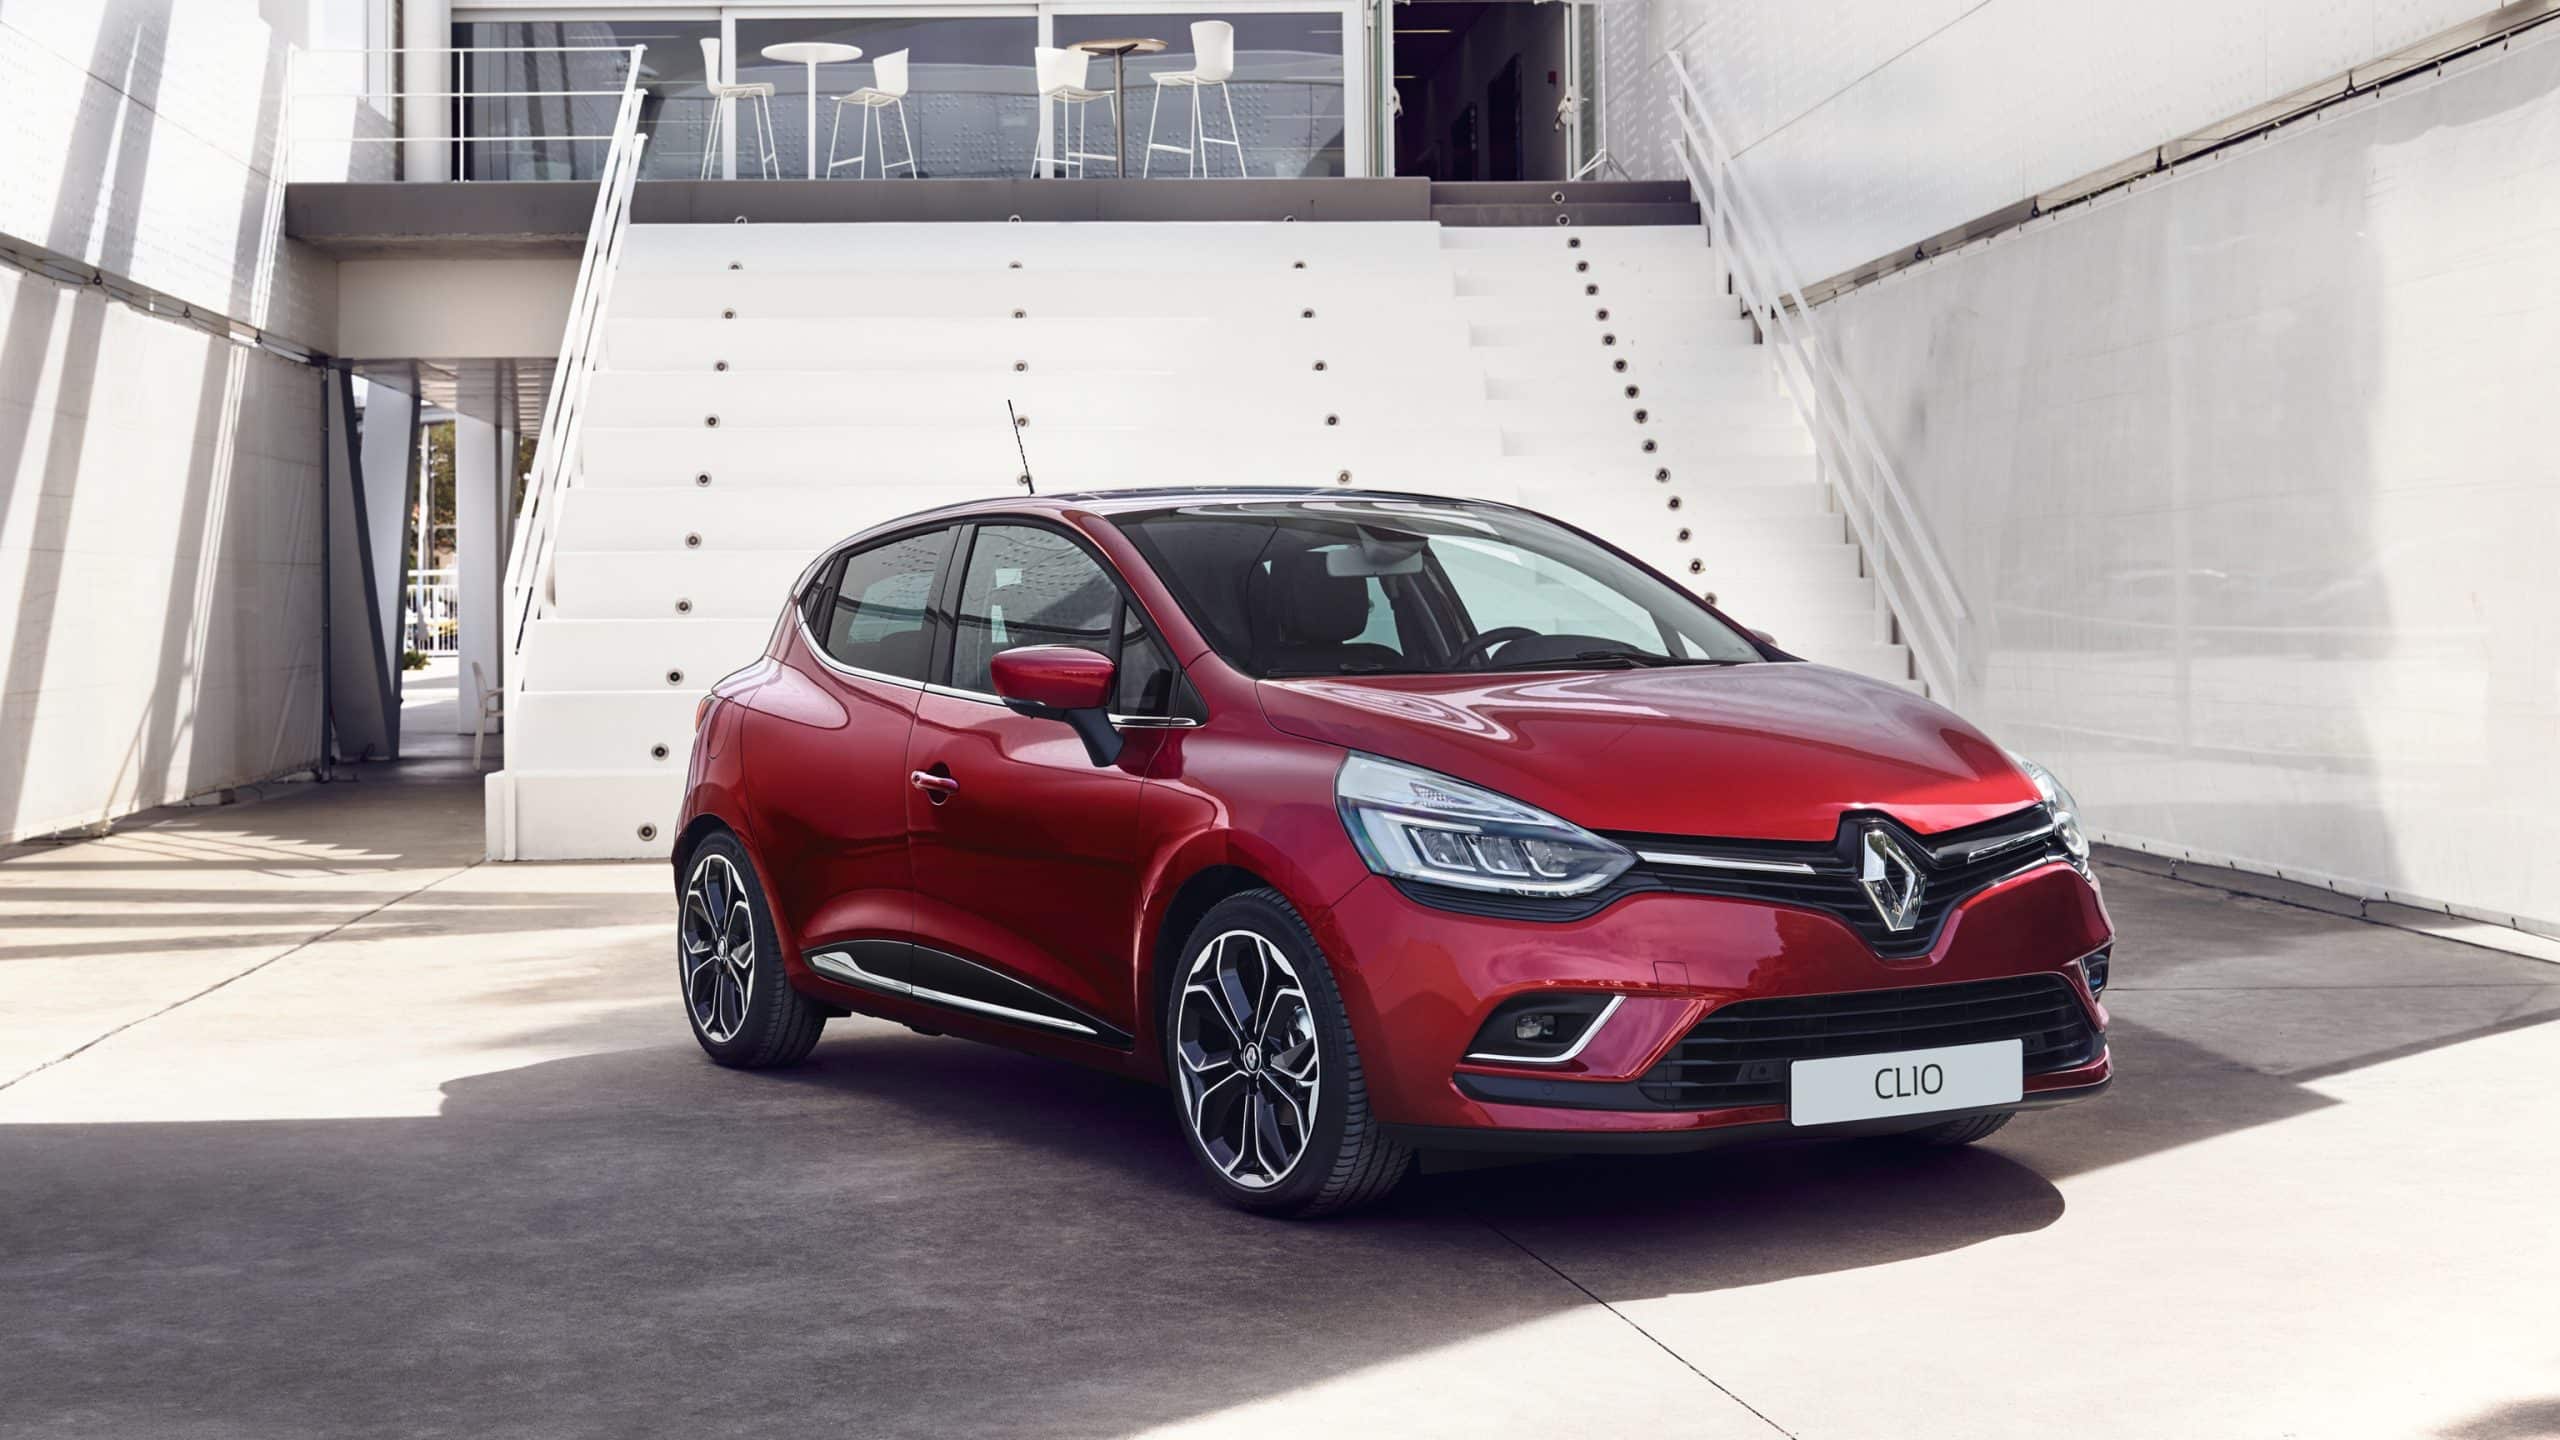 2017 Renault Clio Airbags, Safety Features, Safety Score